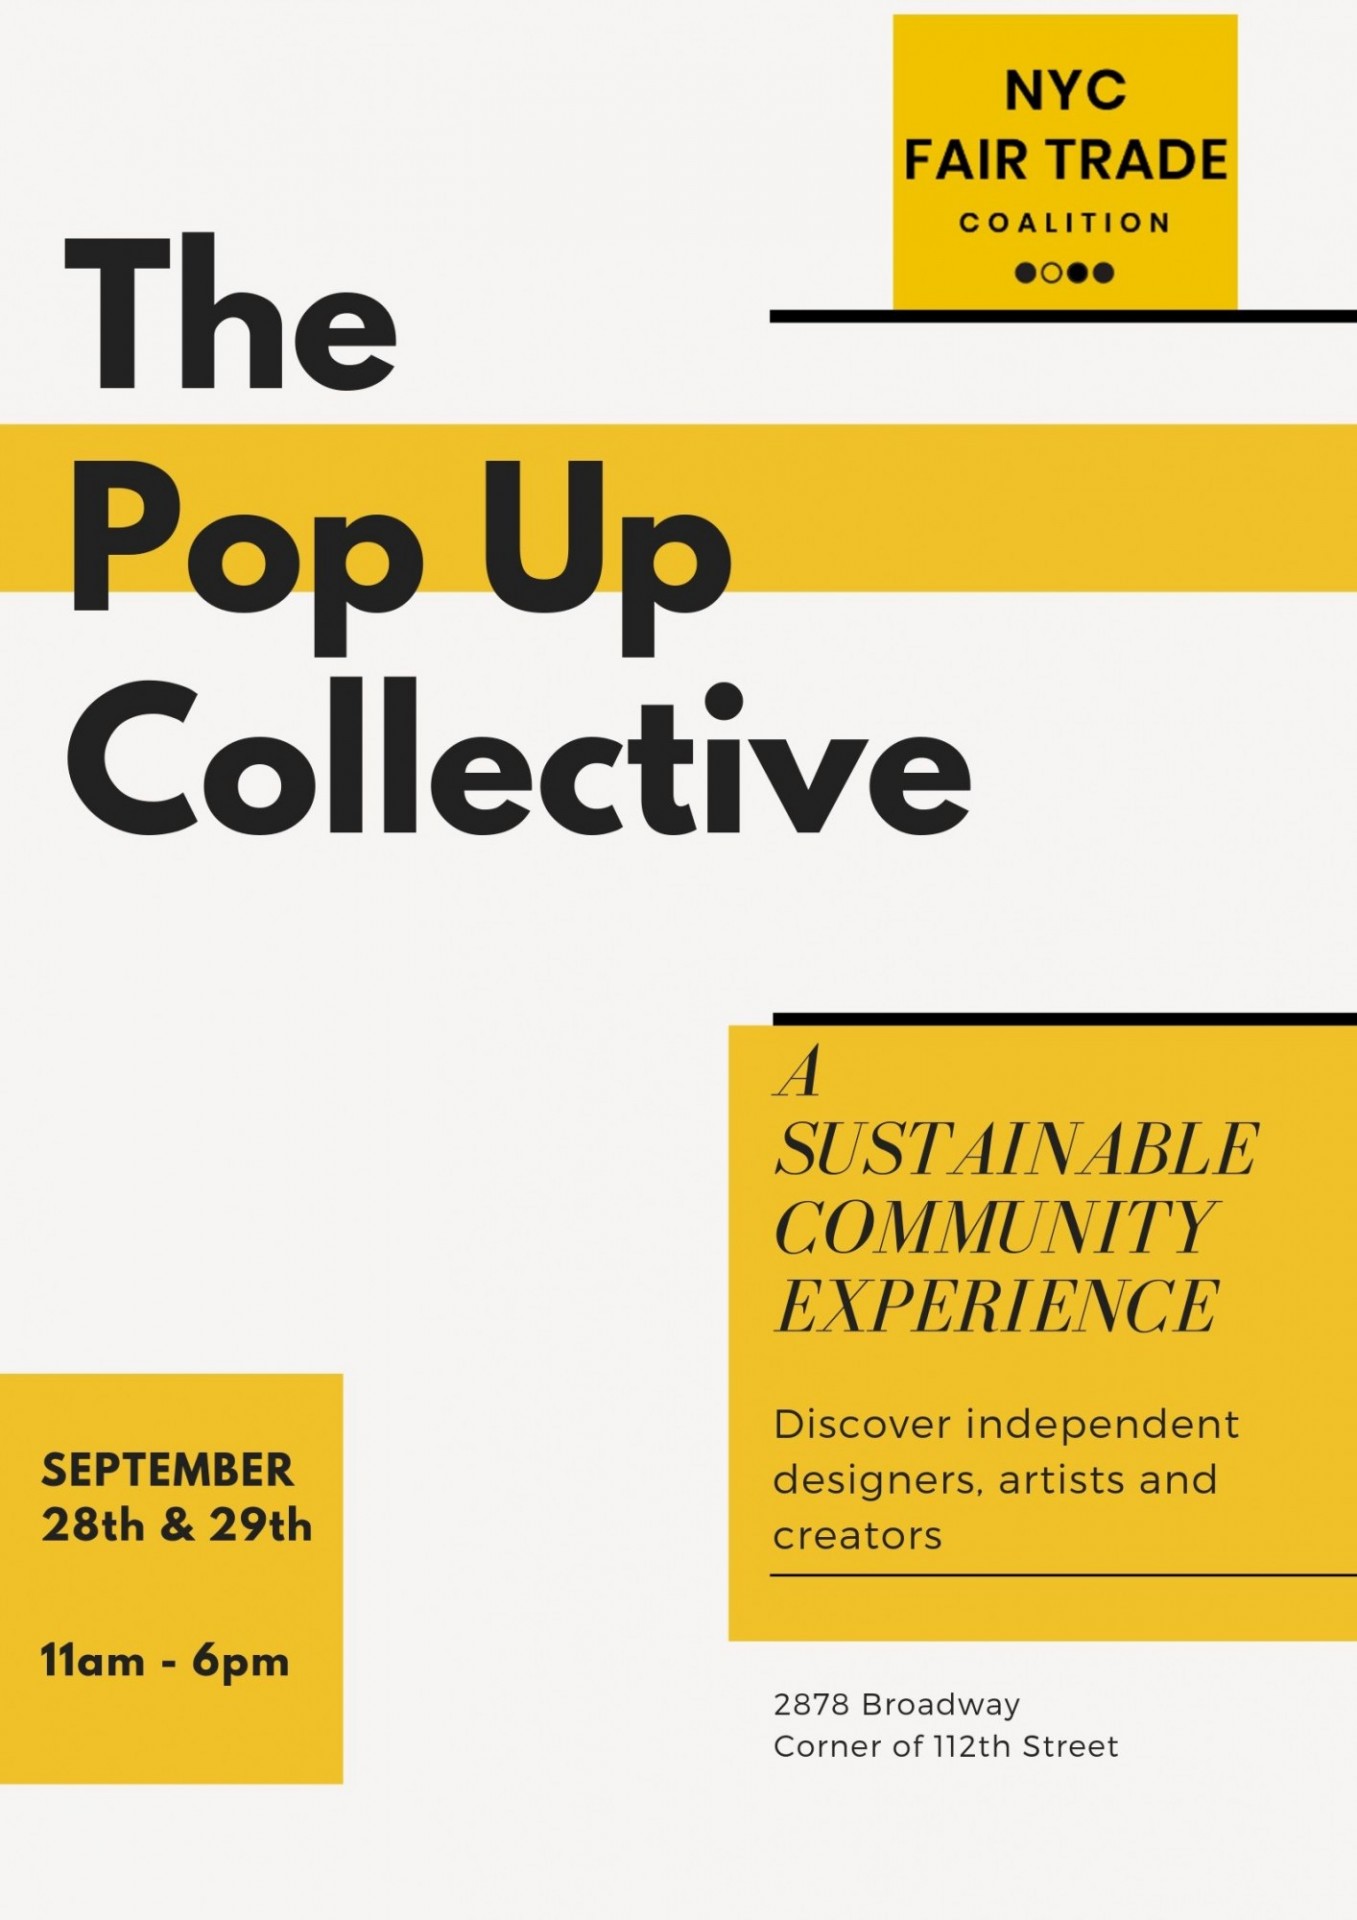 A flyer advertising the Pop-Up Collective market